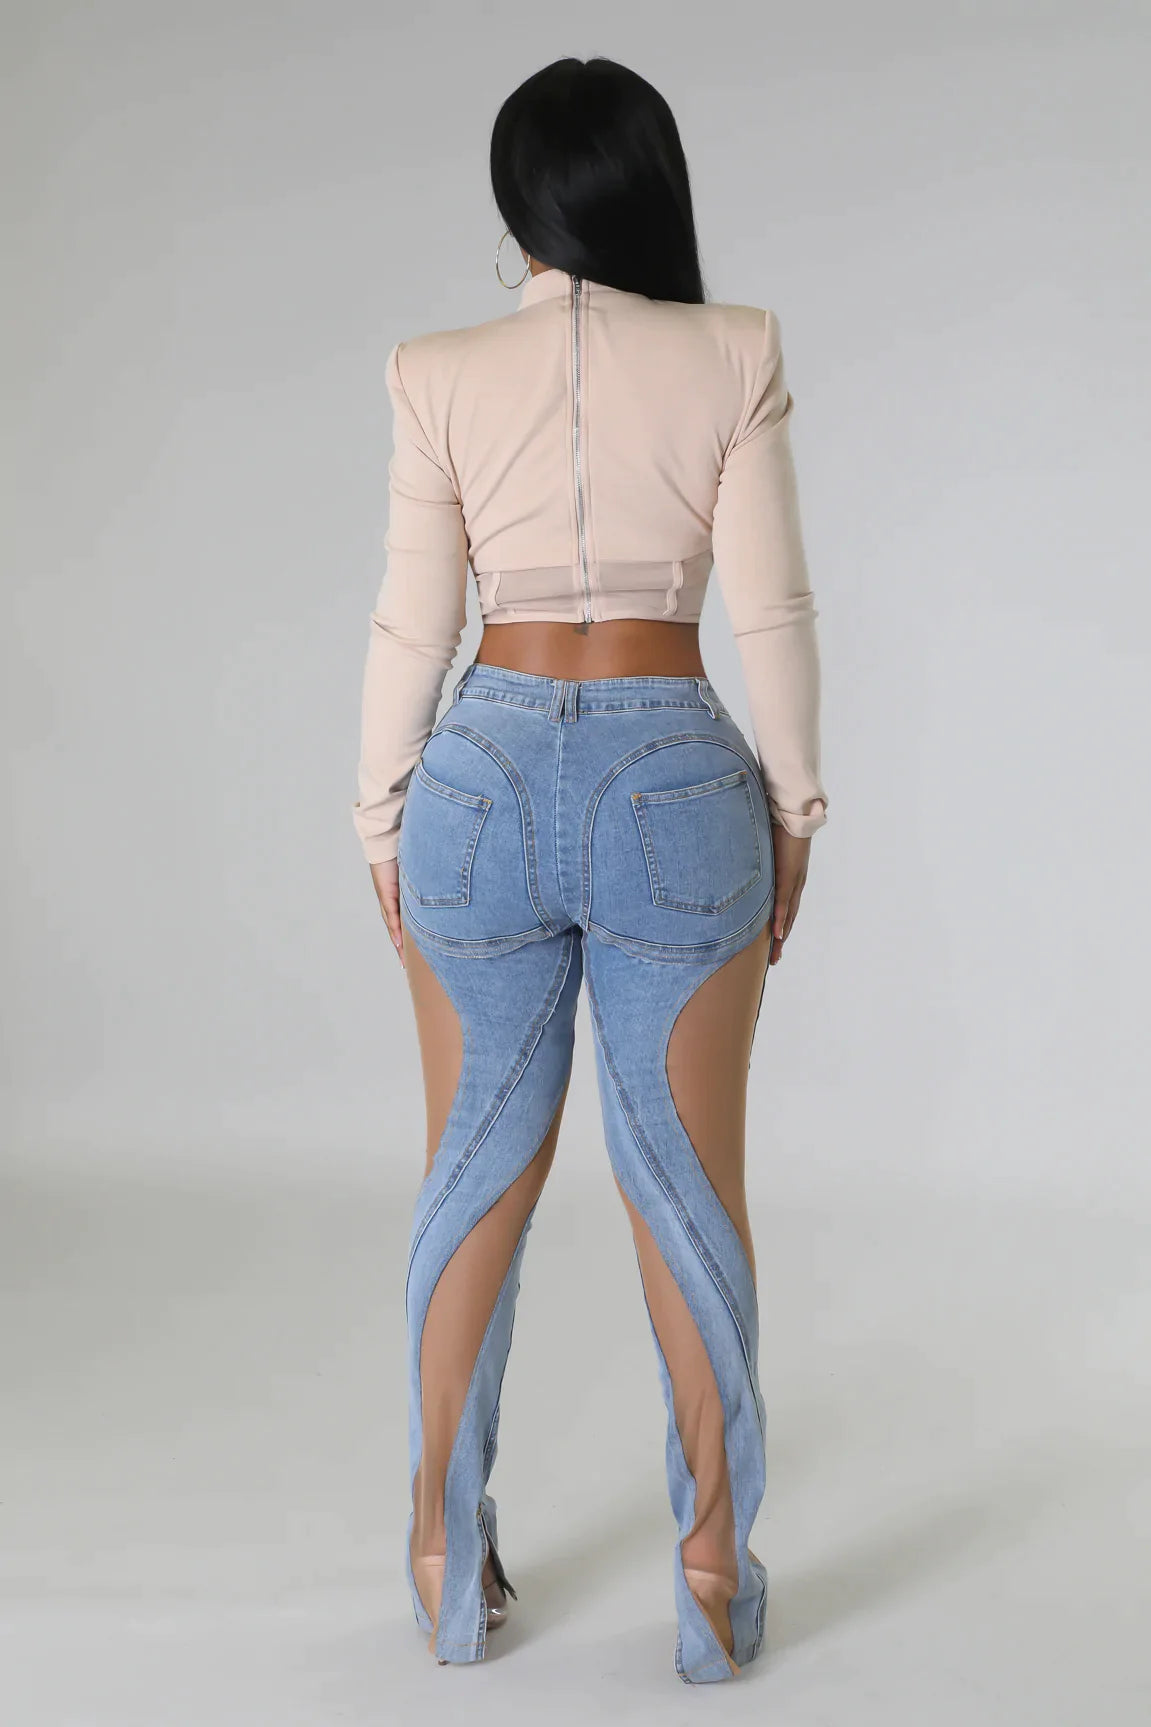 Michelle Sheer Accent Jeans